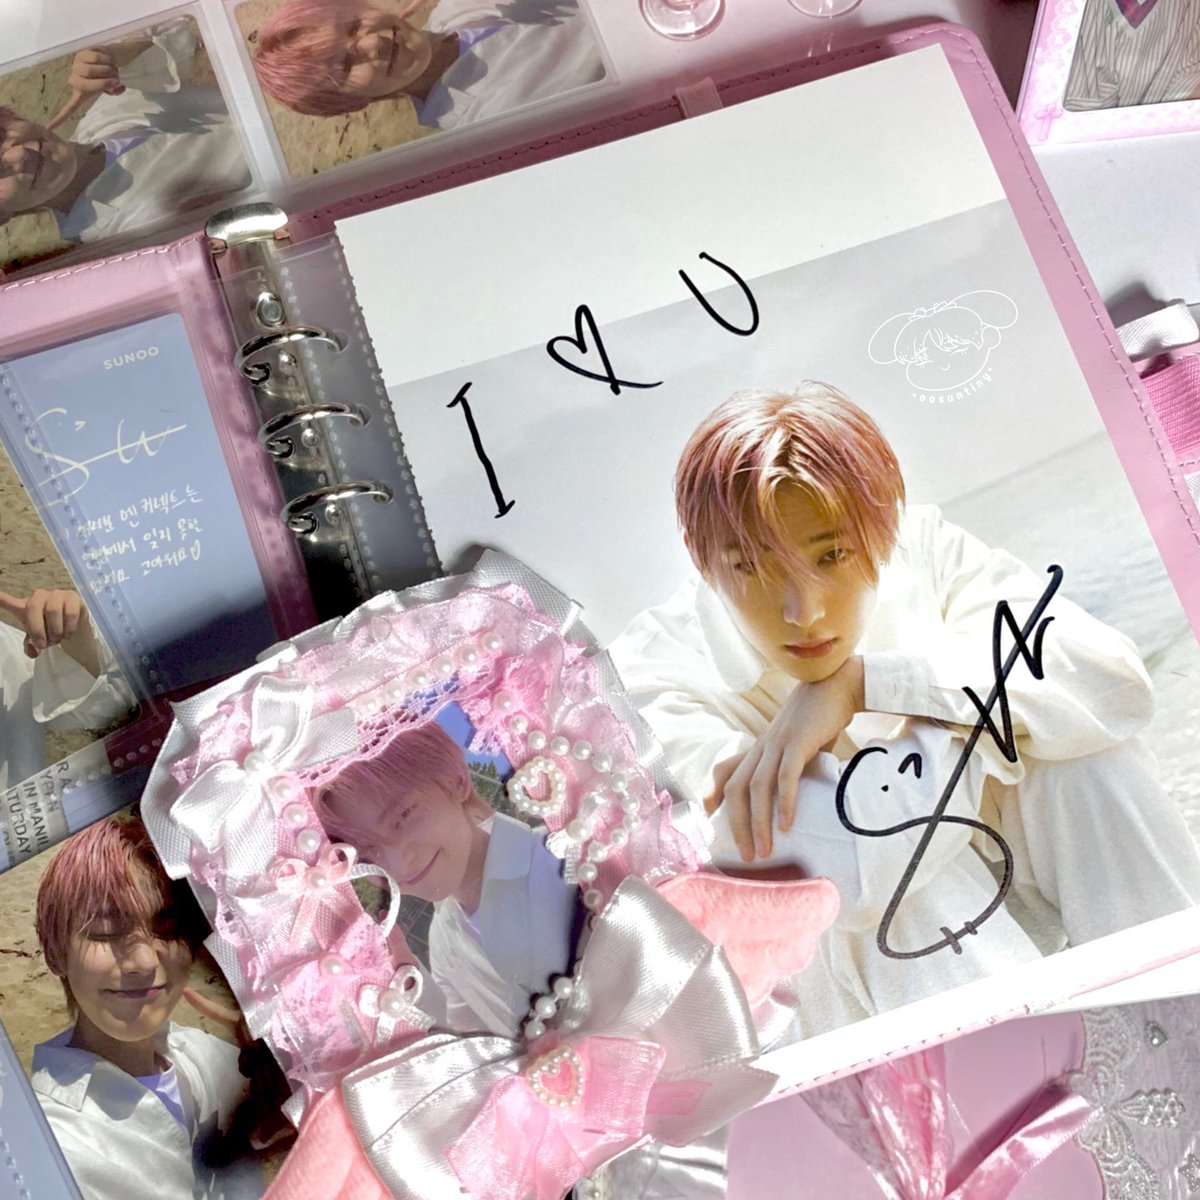 ˚ʚ Sunoo Birthday Giveaway ! ɞ˚ (PH only)

𓂋࣪ 1 winner of Sunoo Dilemma Signed Page!

 ✶ mechanics
—  mbf , like and rt
— drop bday tags for sunoo w/ your fave sunoo pic!

ends: tba~